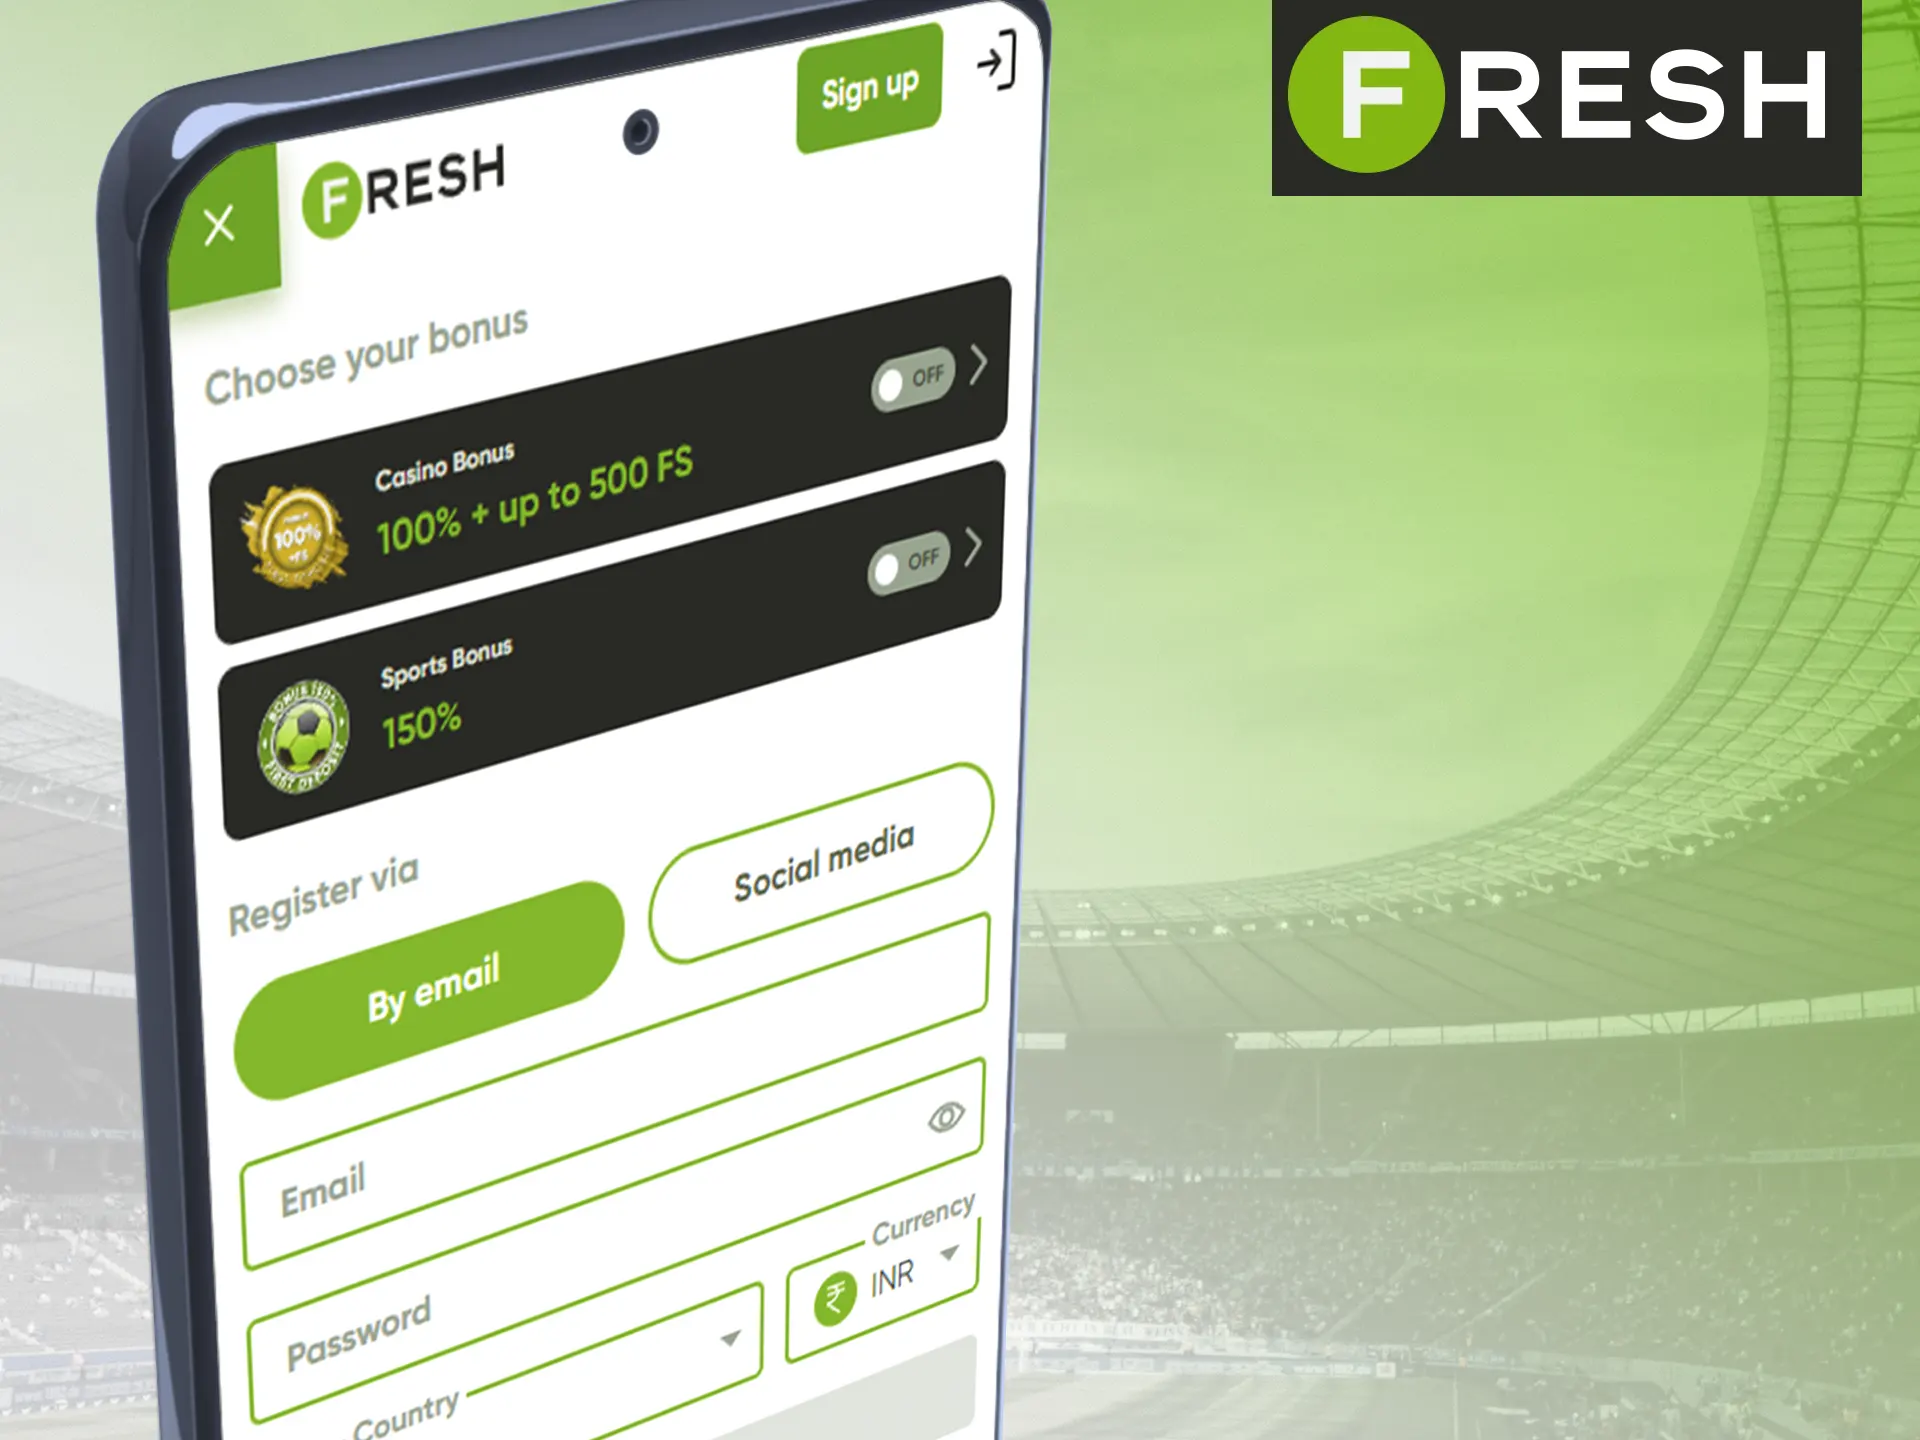 Register a new account in the Fresh Casino app.